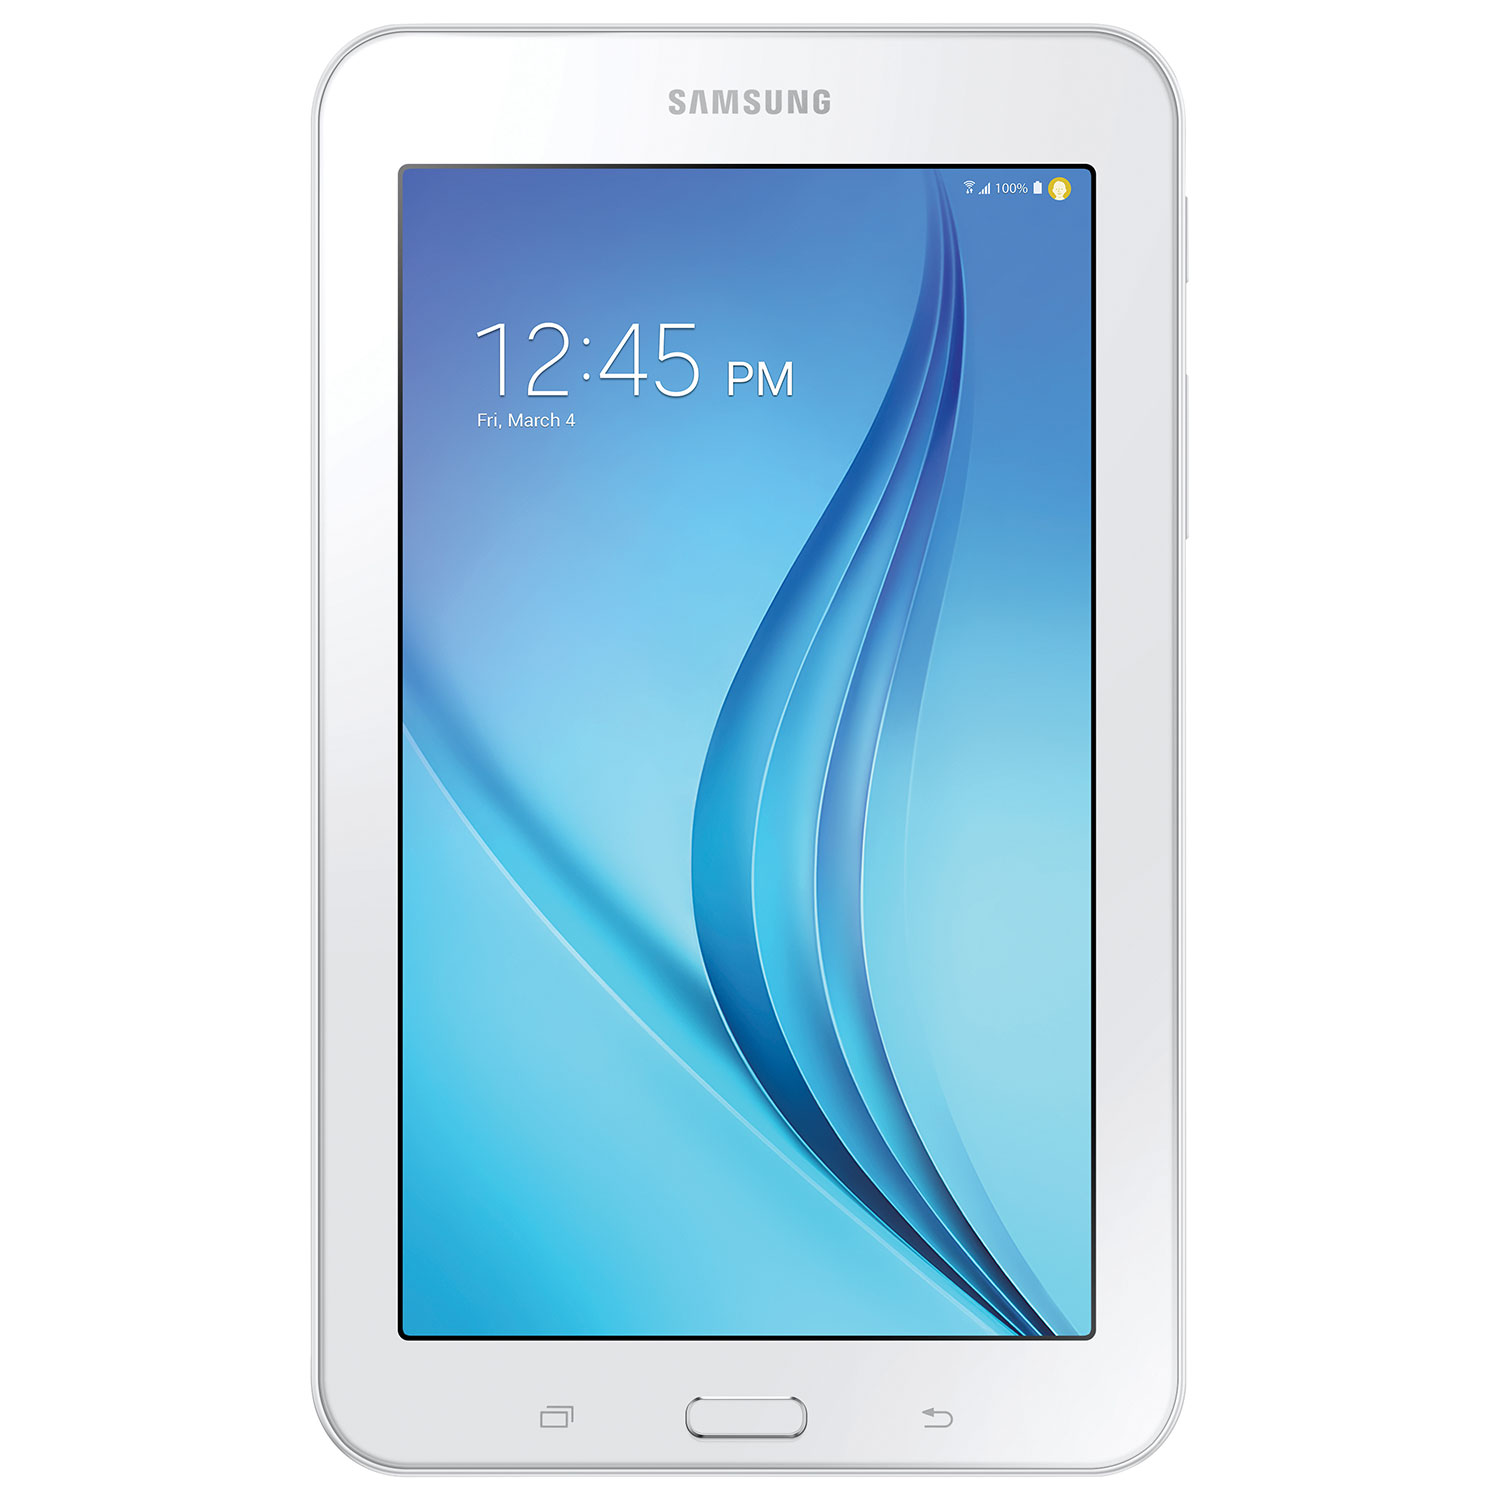 samsung galaxy tab lite android tablet with spreadtrum accent tablette fast shark quad core processor white tablets best table cloth small grey bedroom chair ceramic outdoor end